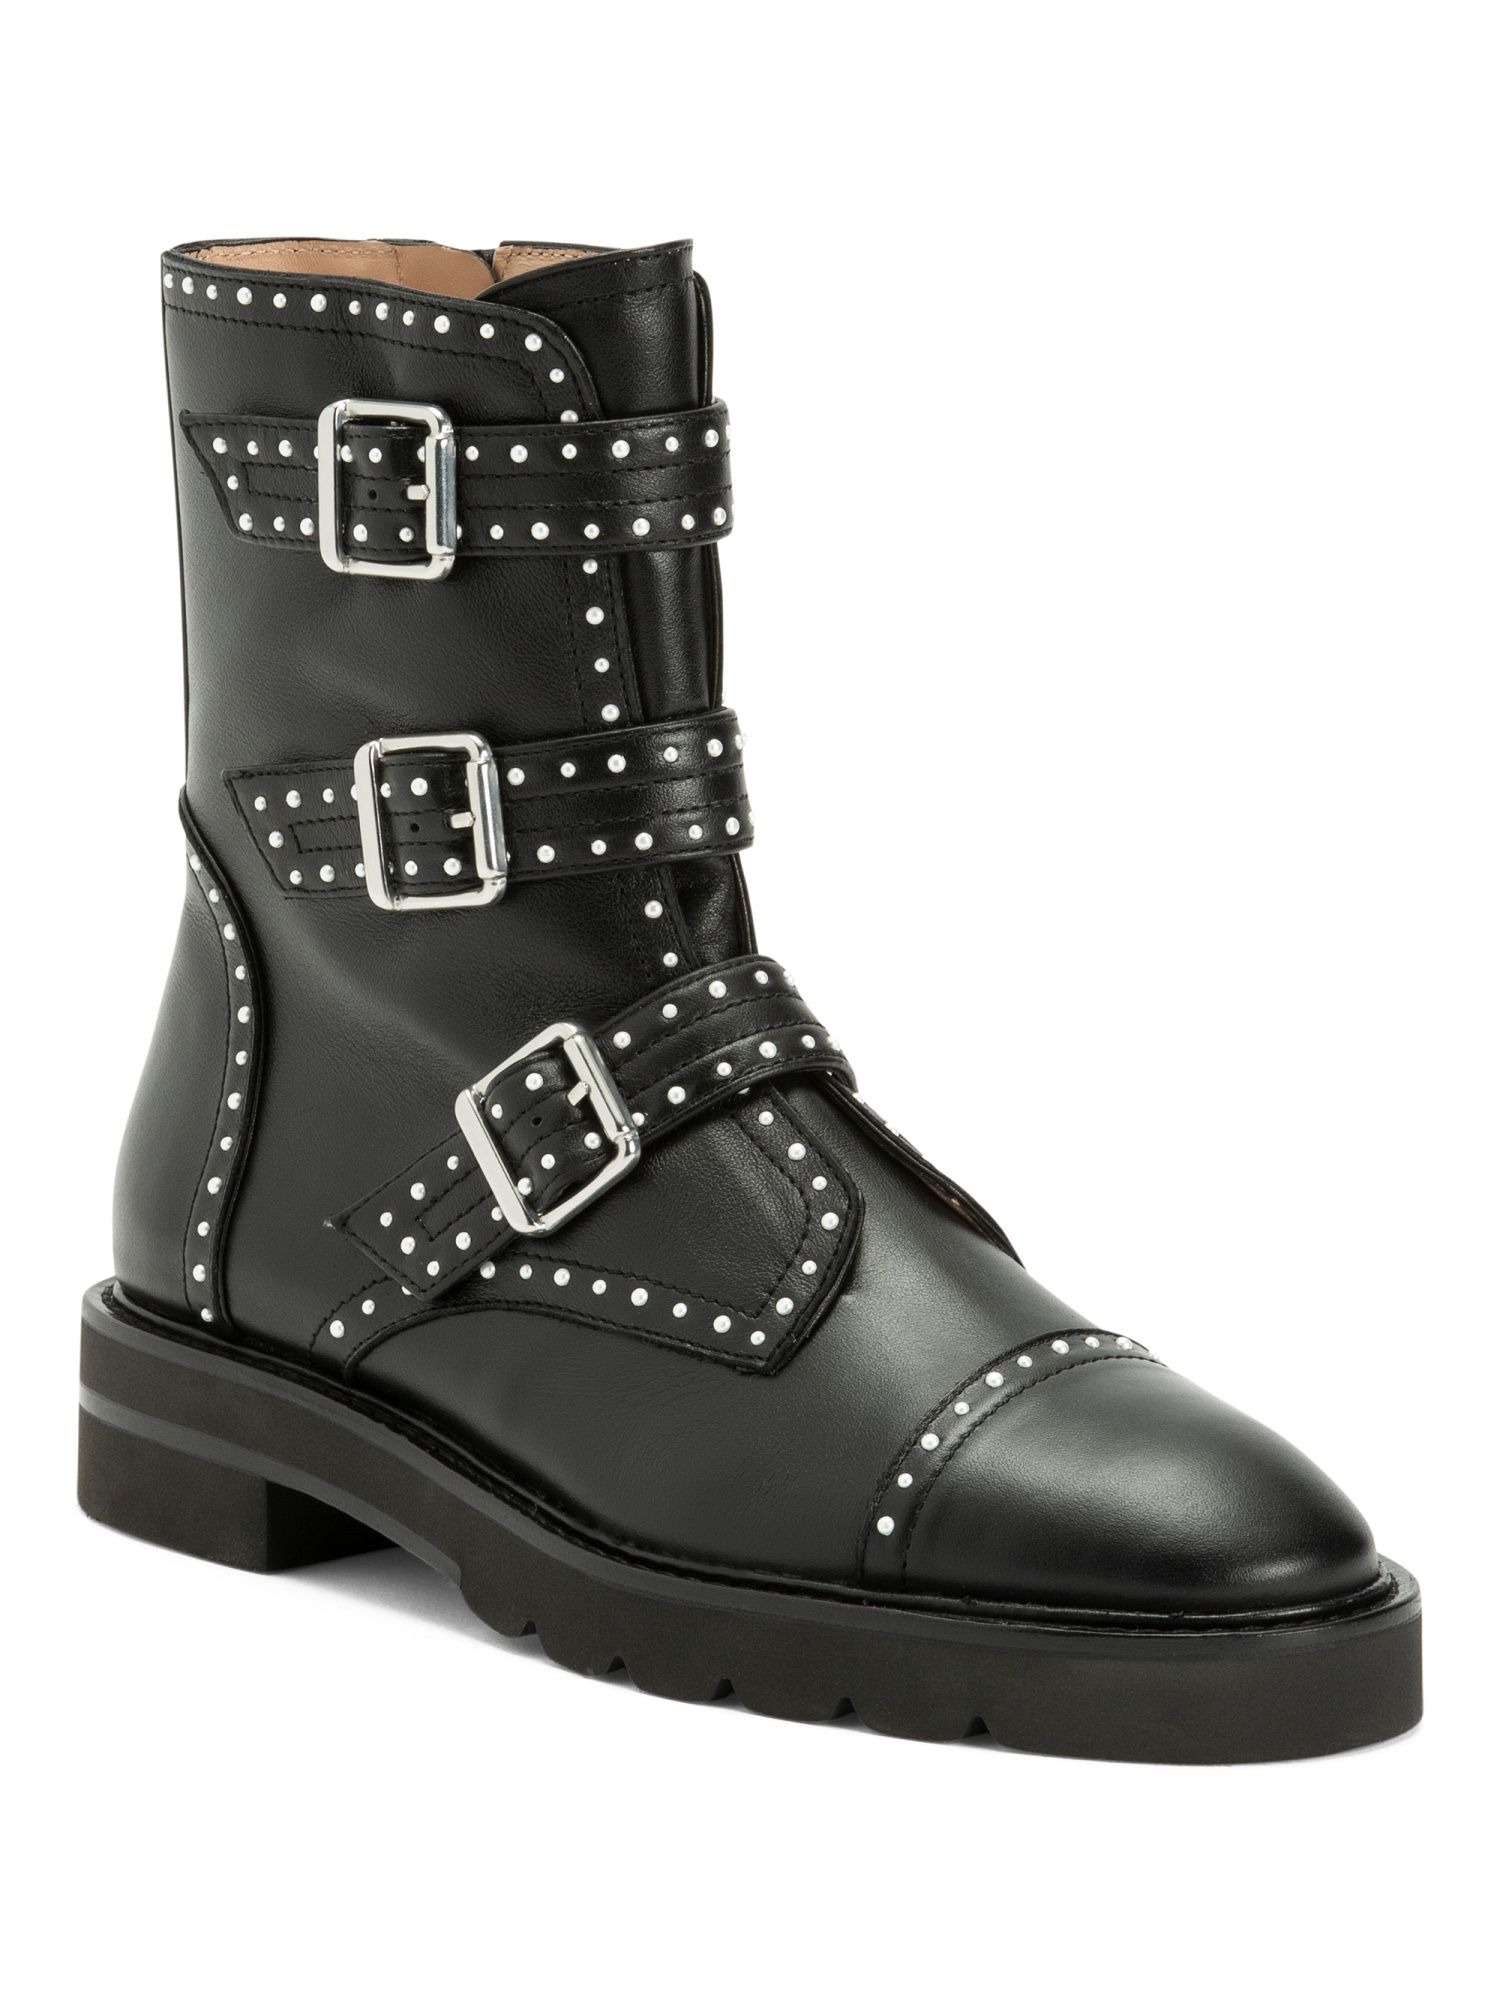 Made In Spain Leather Studded Buckle Boots | TJ Maxx